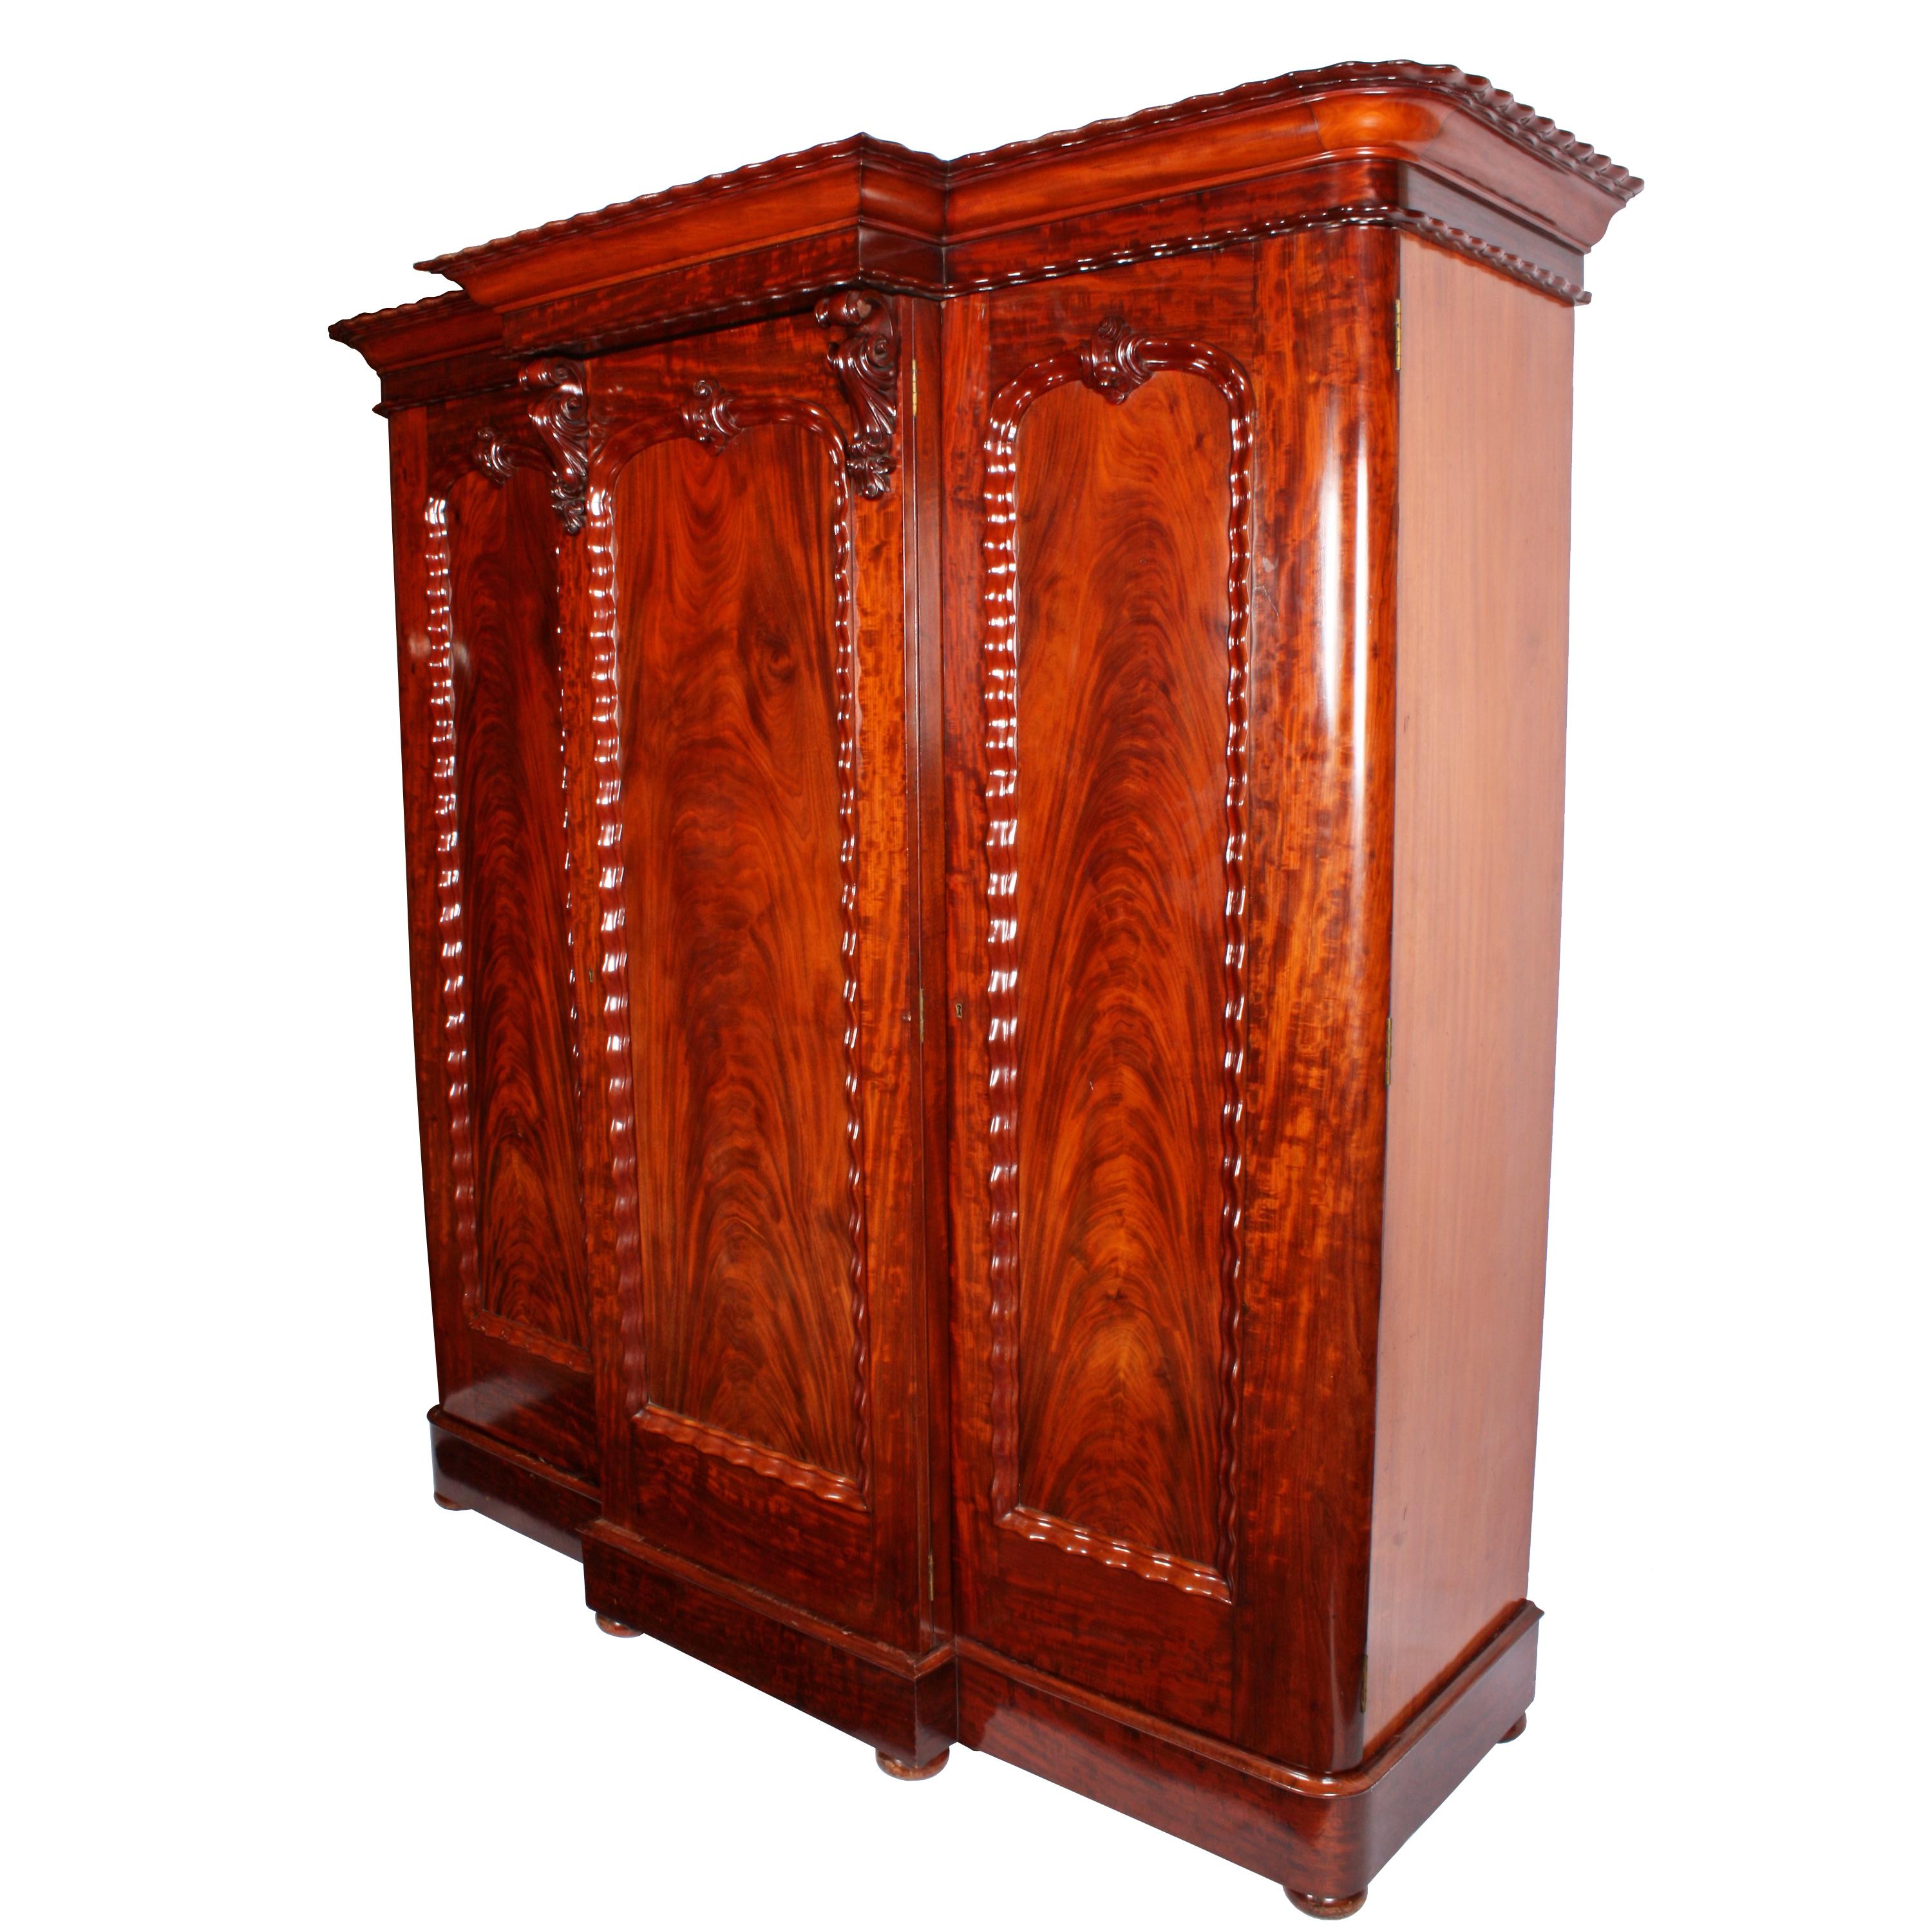 Fine Victorian mahogany wardrobe


A very good example of a mid-19th century Victorian mahogany three-door breakfront wardrobe.

The robe is made from mahogany with the finest figured mahogany veneers used for the door fronts which have